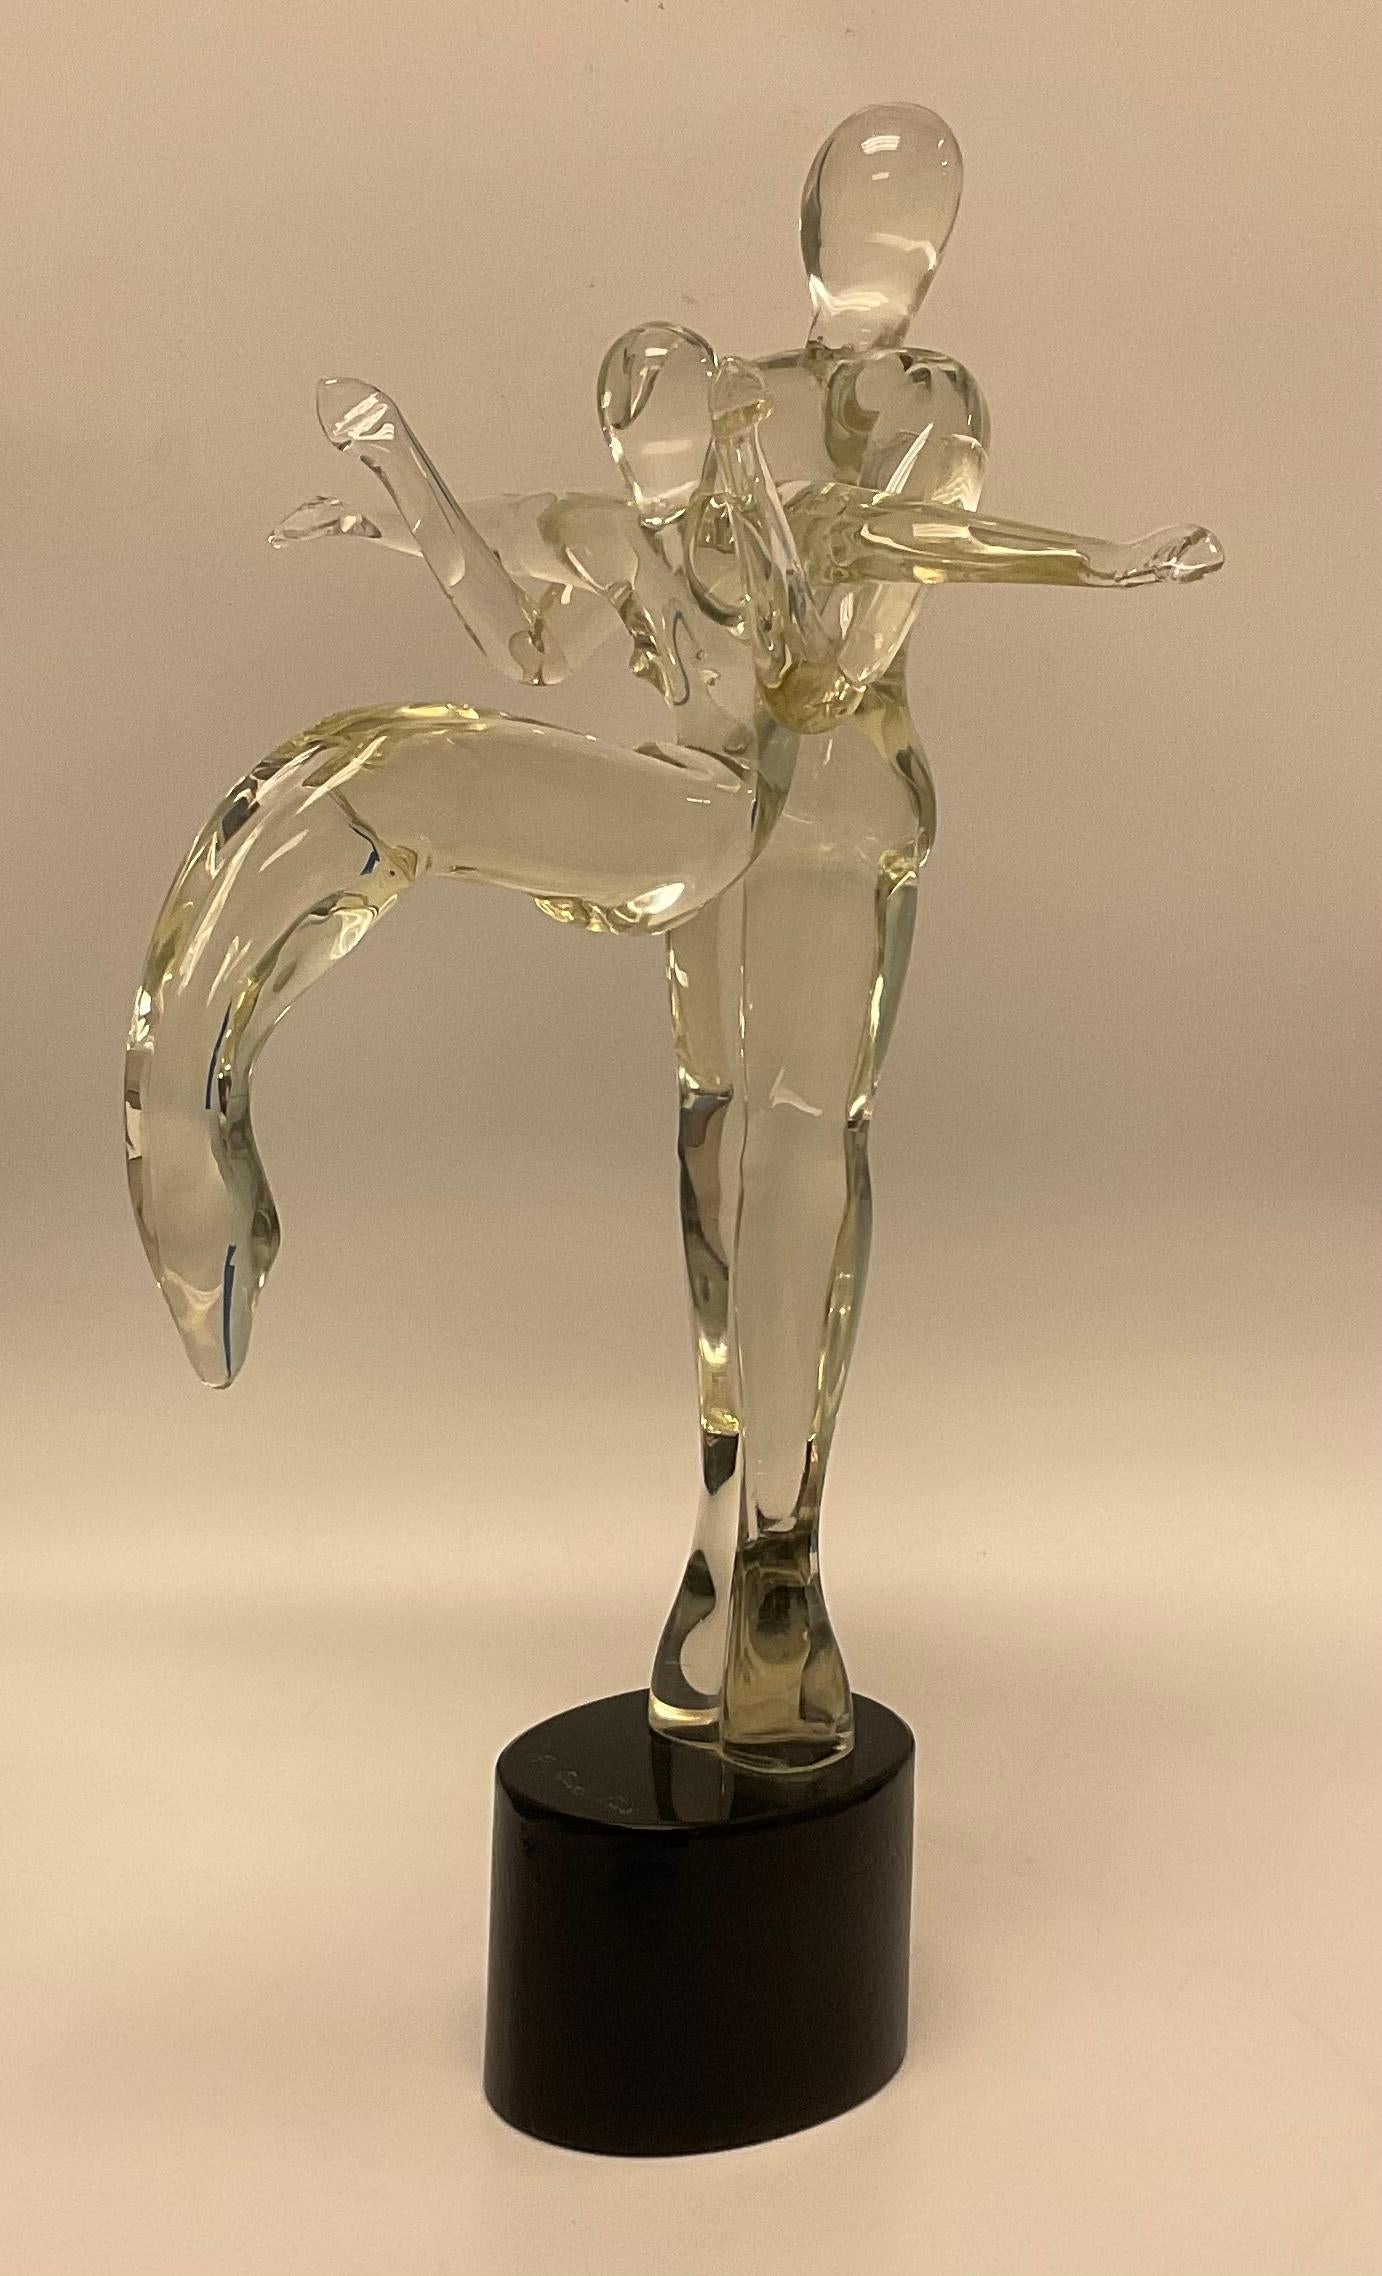 Renato Anatra Gymnast dancer sculpture Murano Art Glass Signed by the artist on the black applied base as shown.